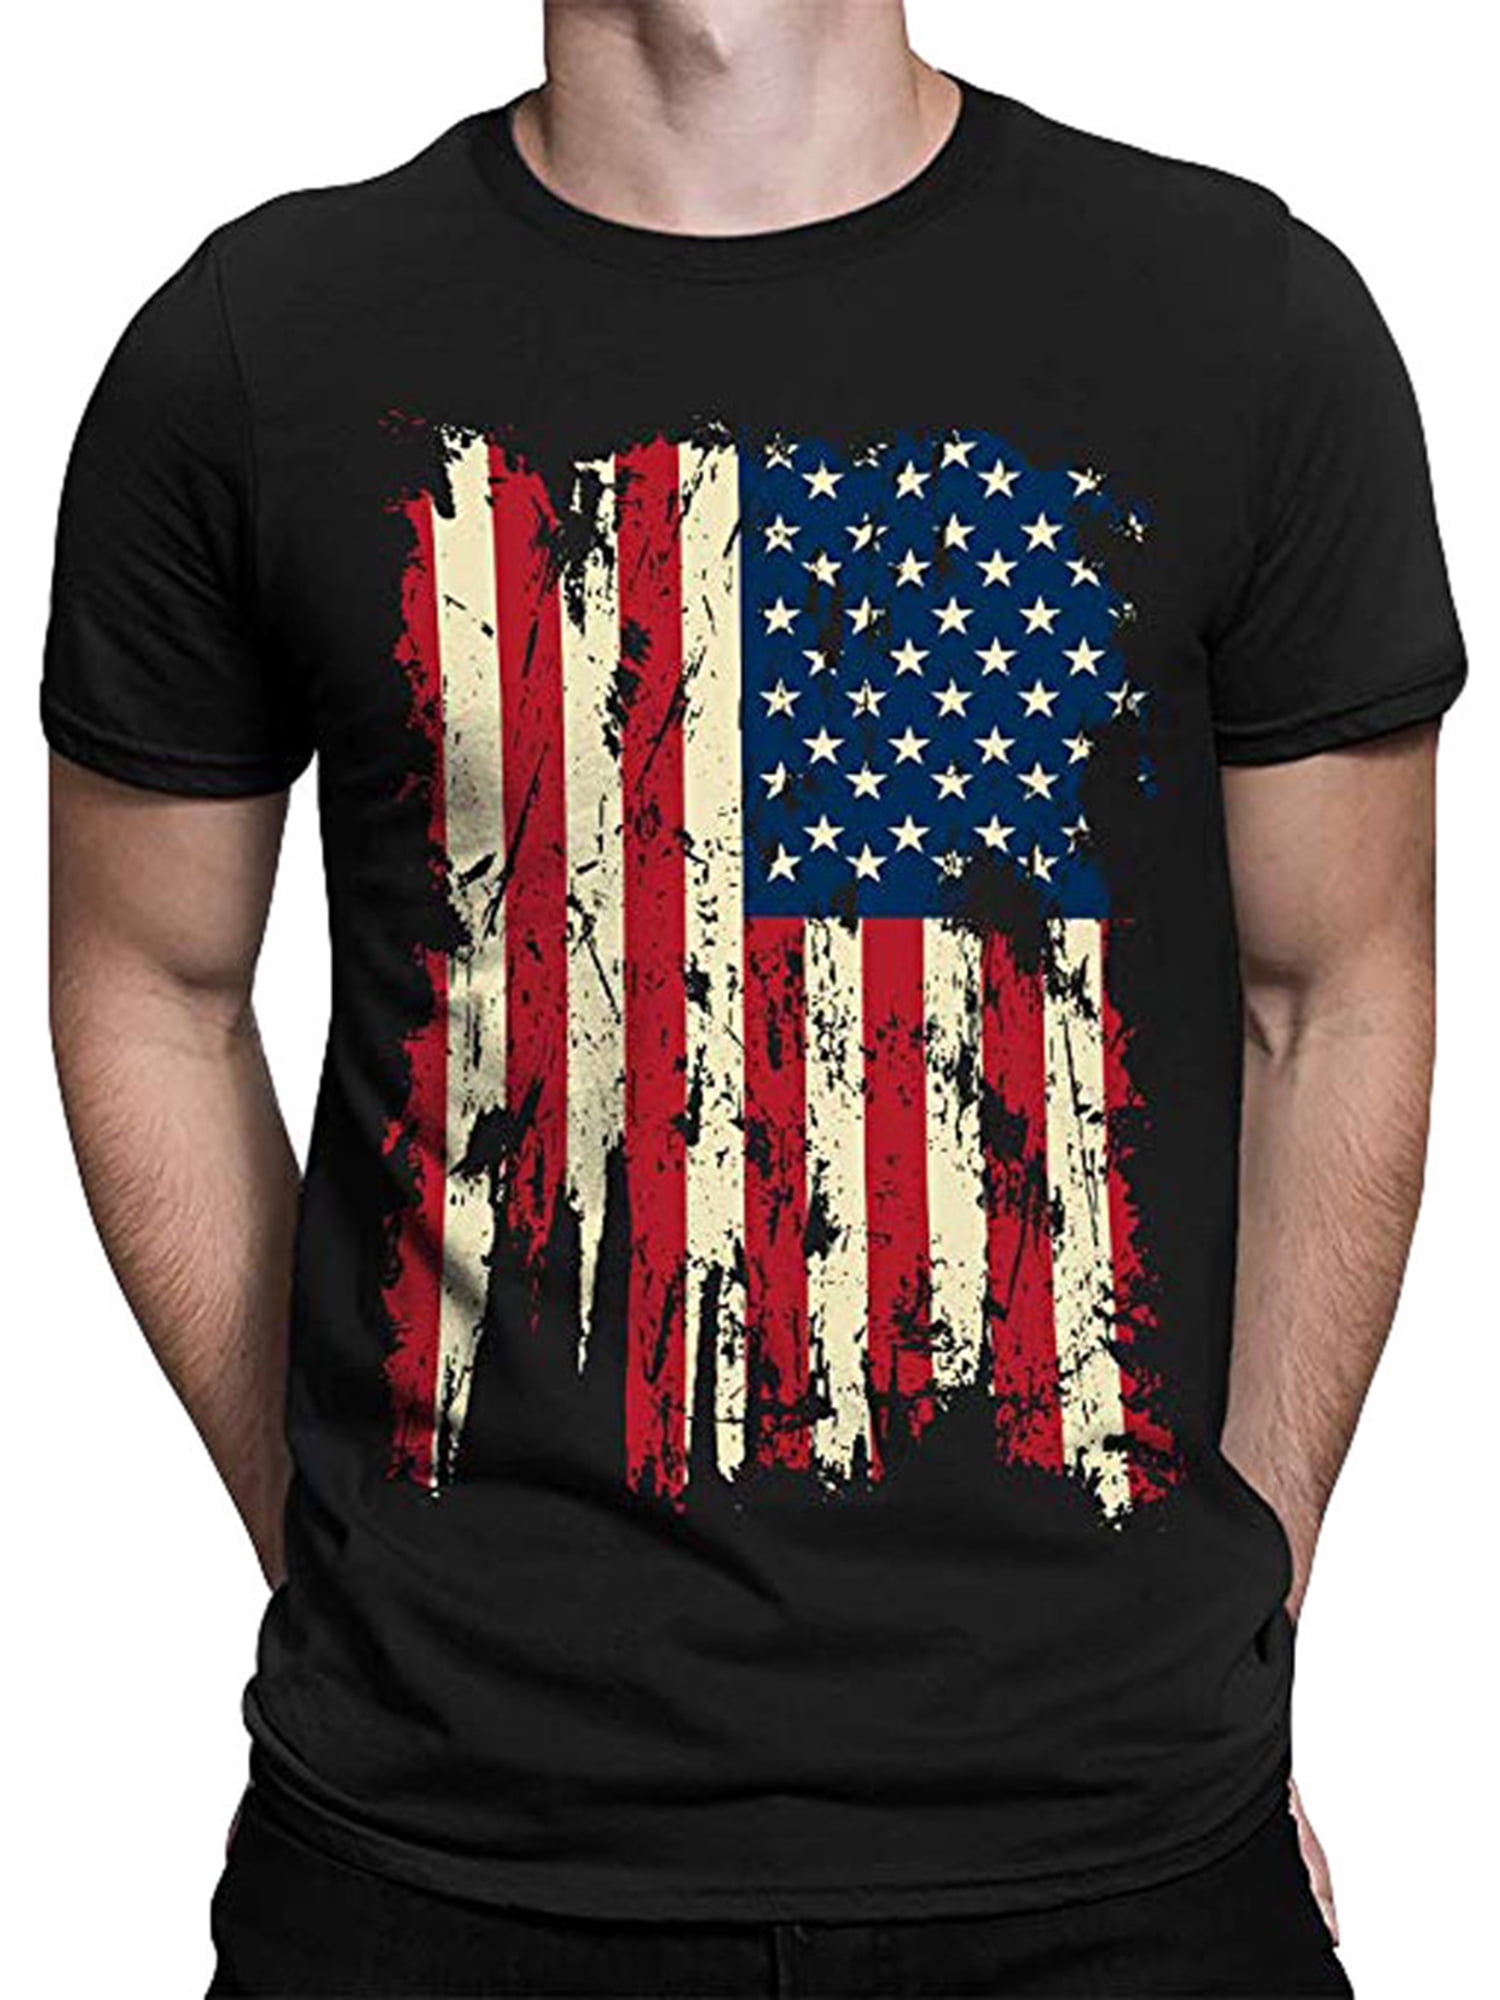 American Flag Black T-Shirt USA independence day Merica Patriot Graphic Tee 